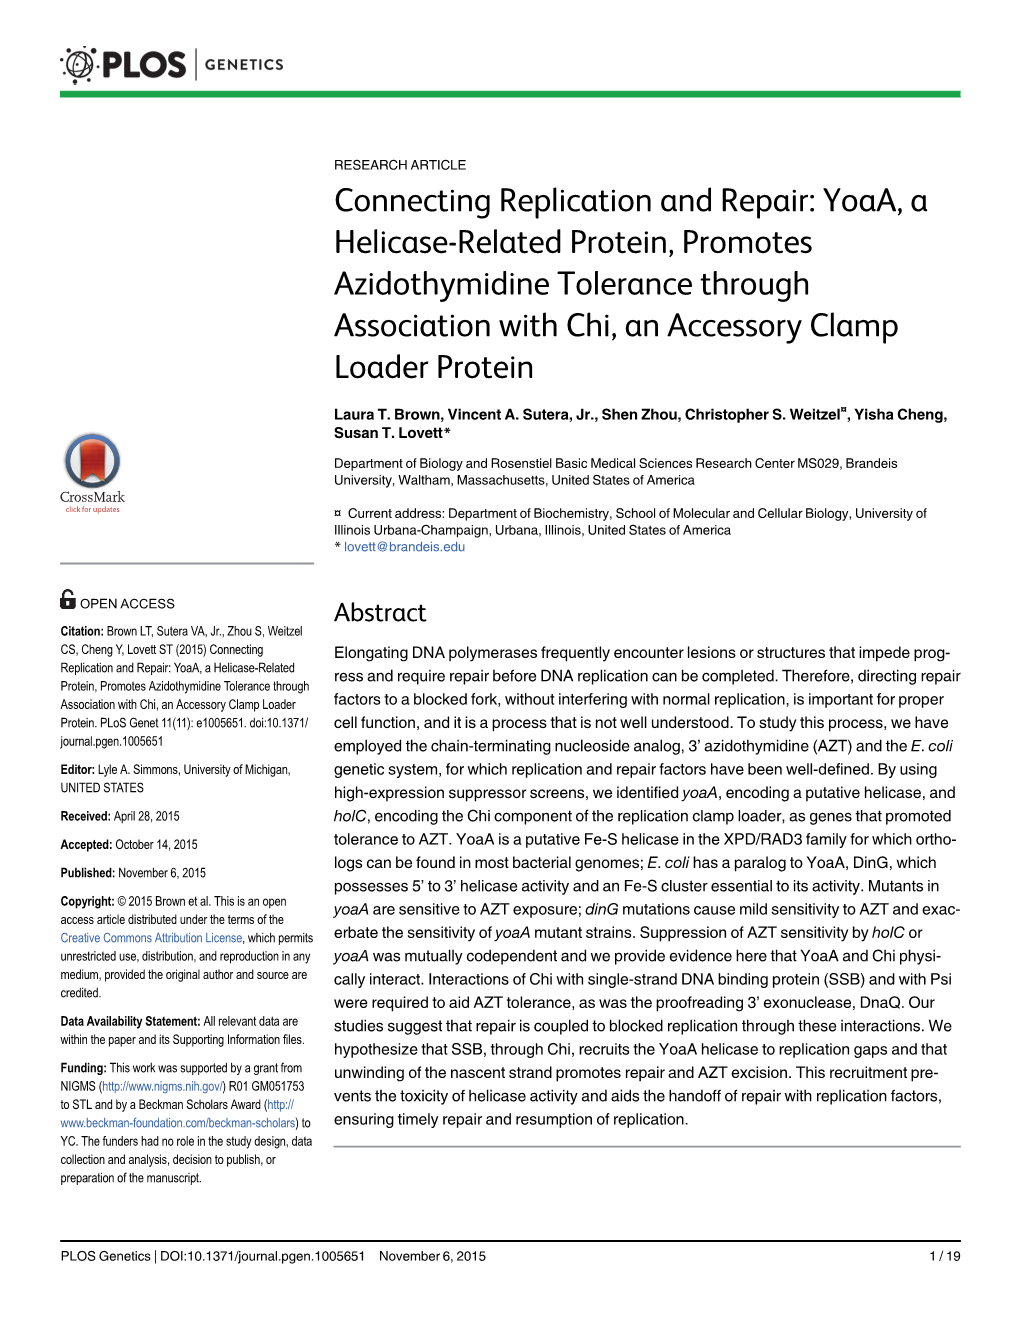 Connecting Replication and Repair: Yoaa, a Helicase-Related Protein, Promotes Azidothymidine Tolerance Through Association with Chi, an Accessory Clamp Loader Protein